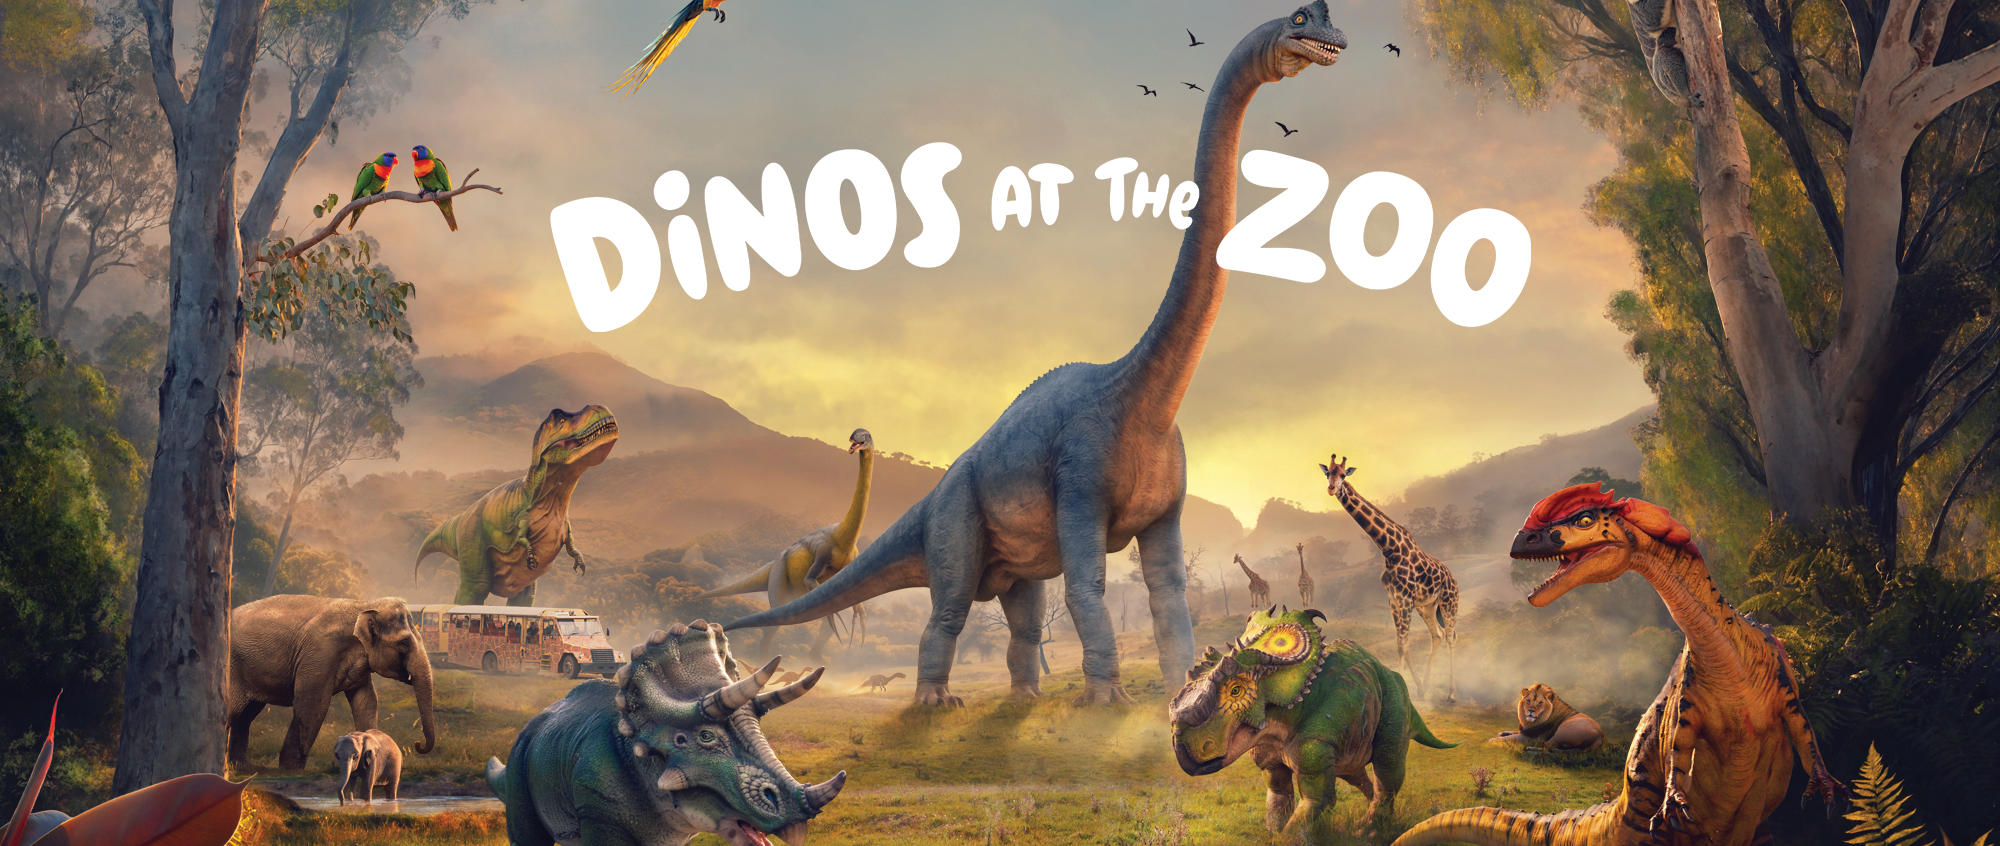 Text says dinos at the zoo. Image shows a number of dinosaurs surrounded by elephants, giraffes, lions, lorikeets, macaws and koalas